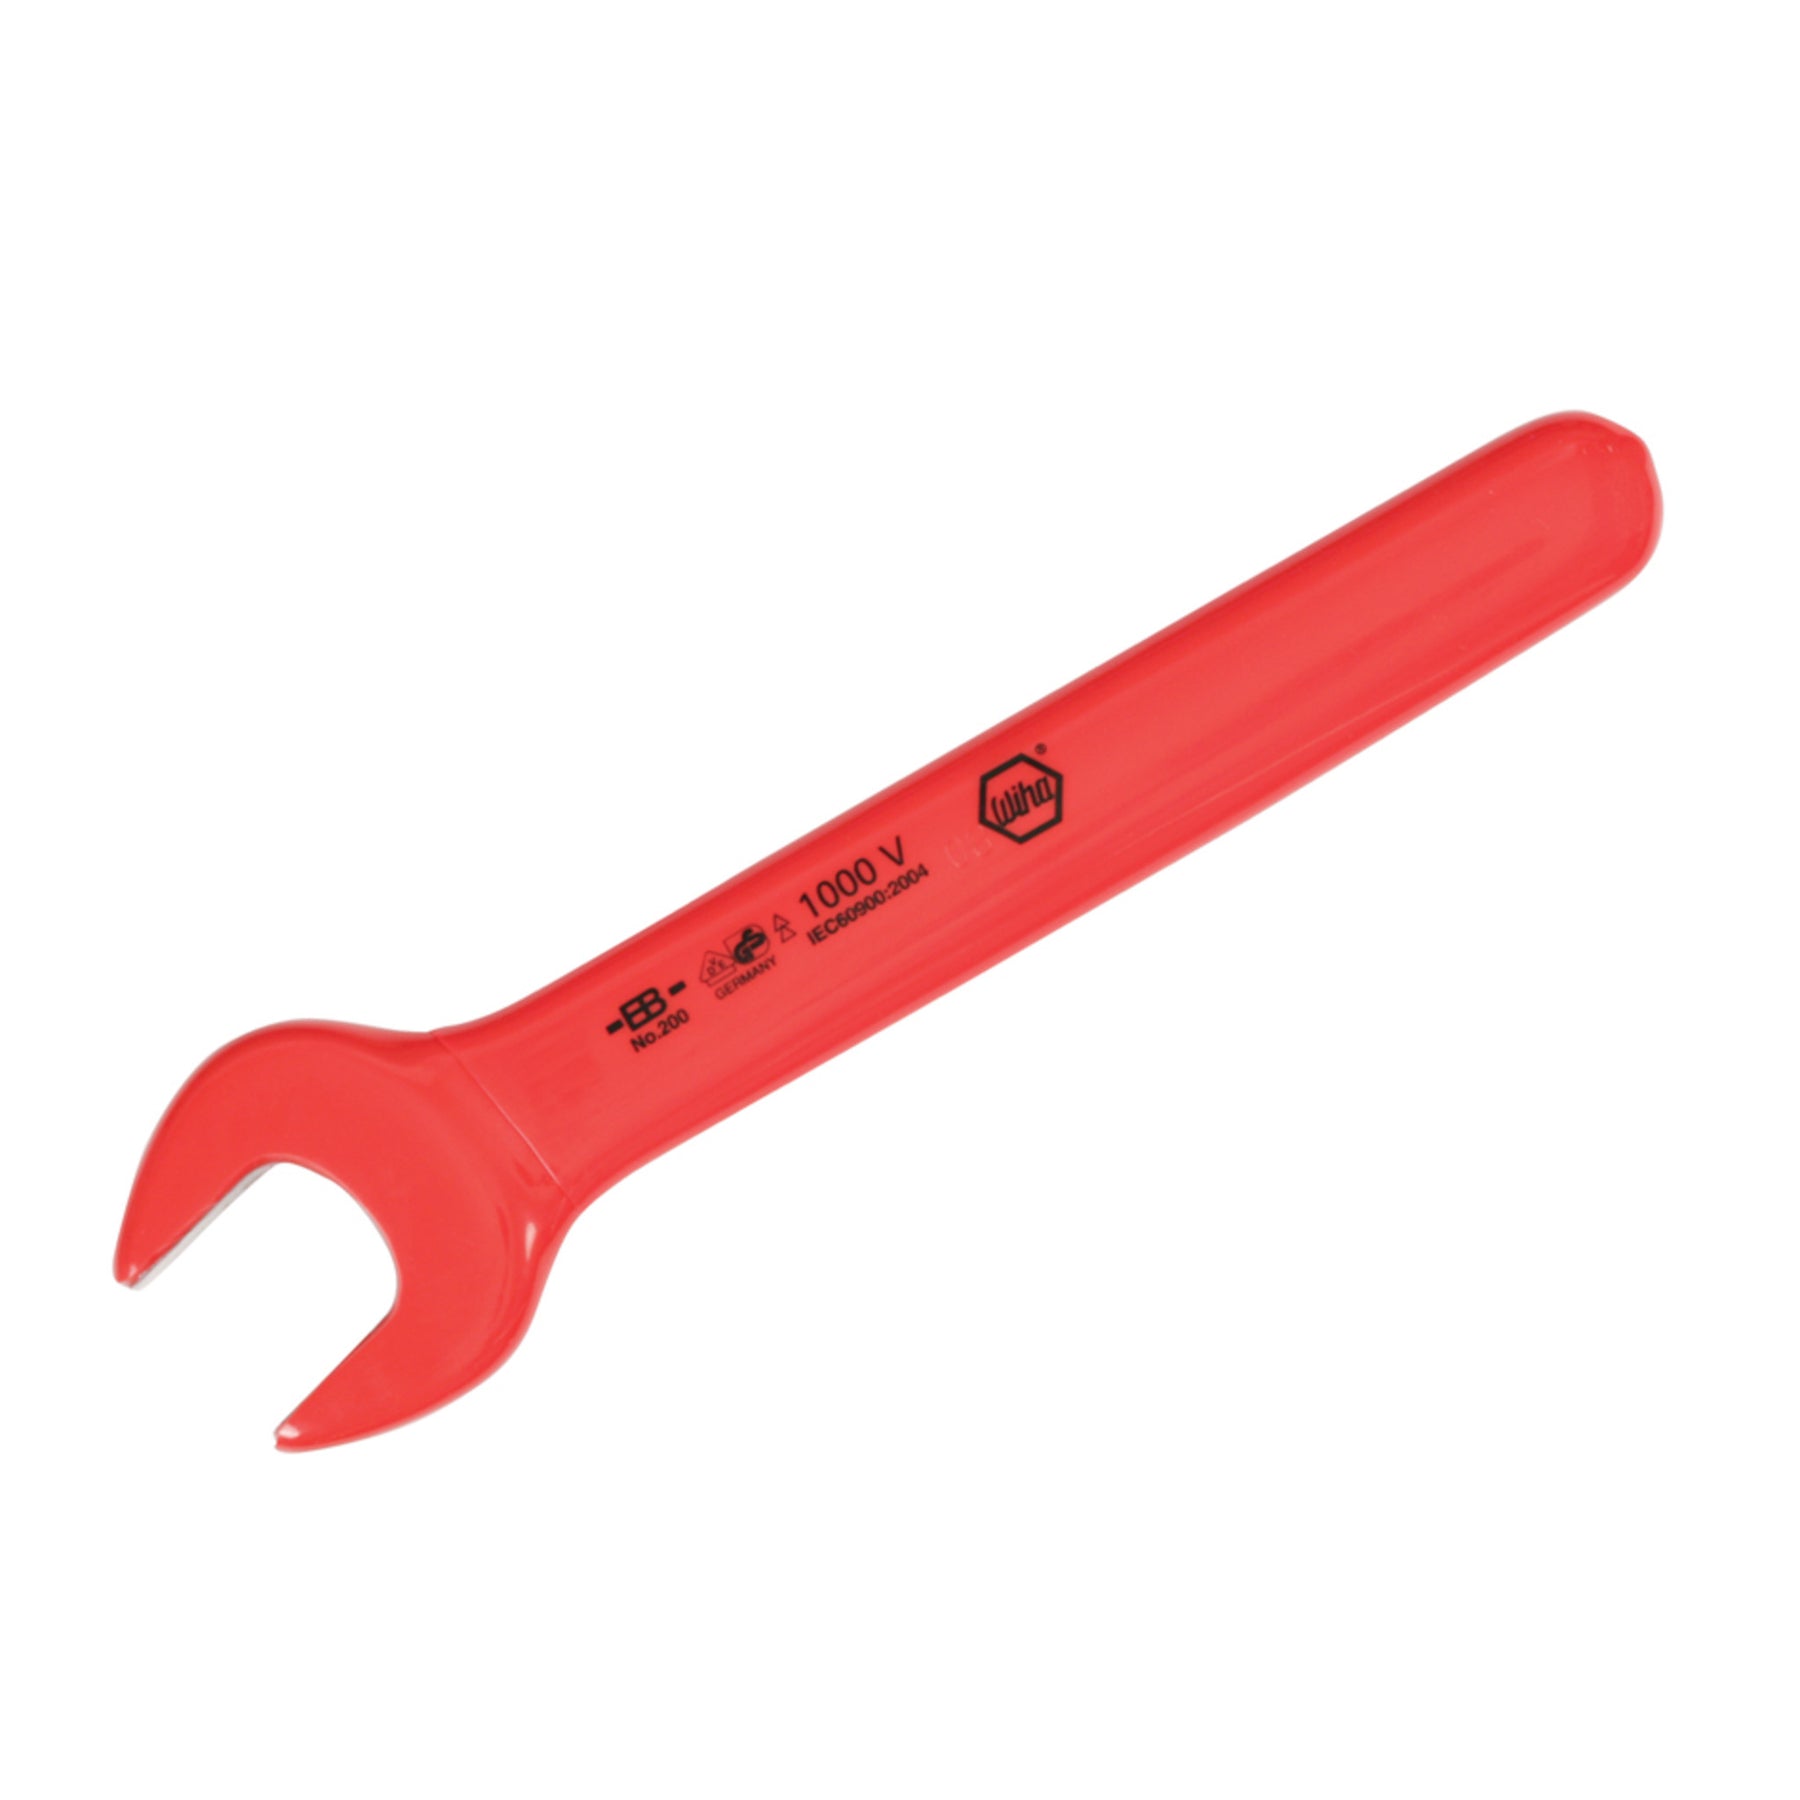 Wiha 20138 Insulated Open End Wrench 9/16"